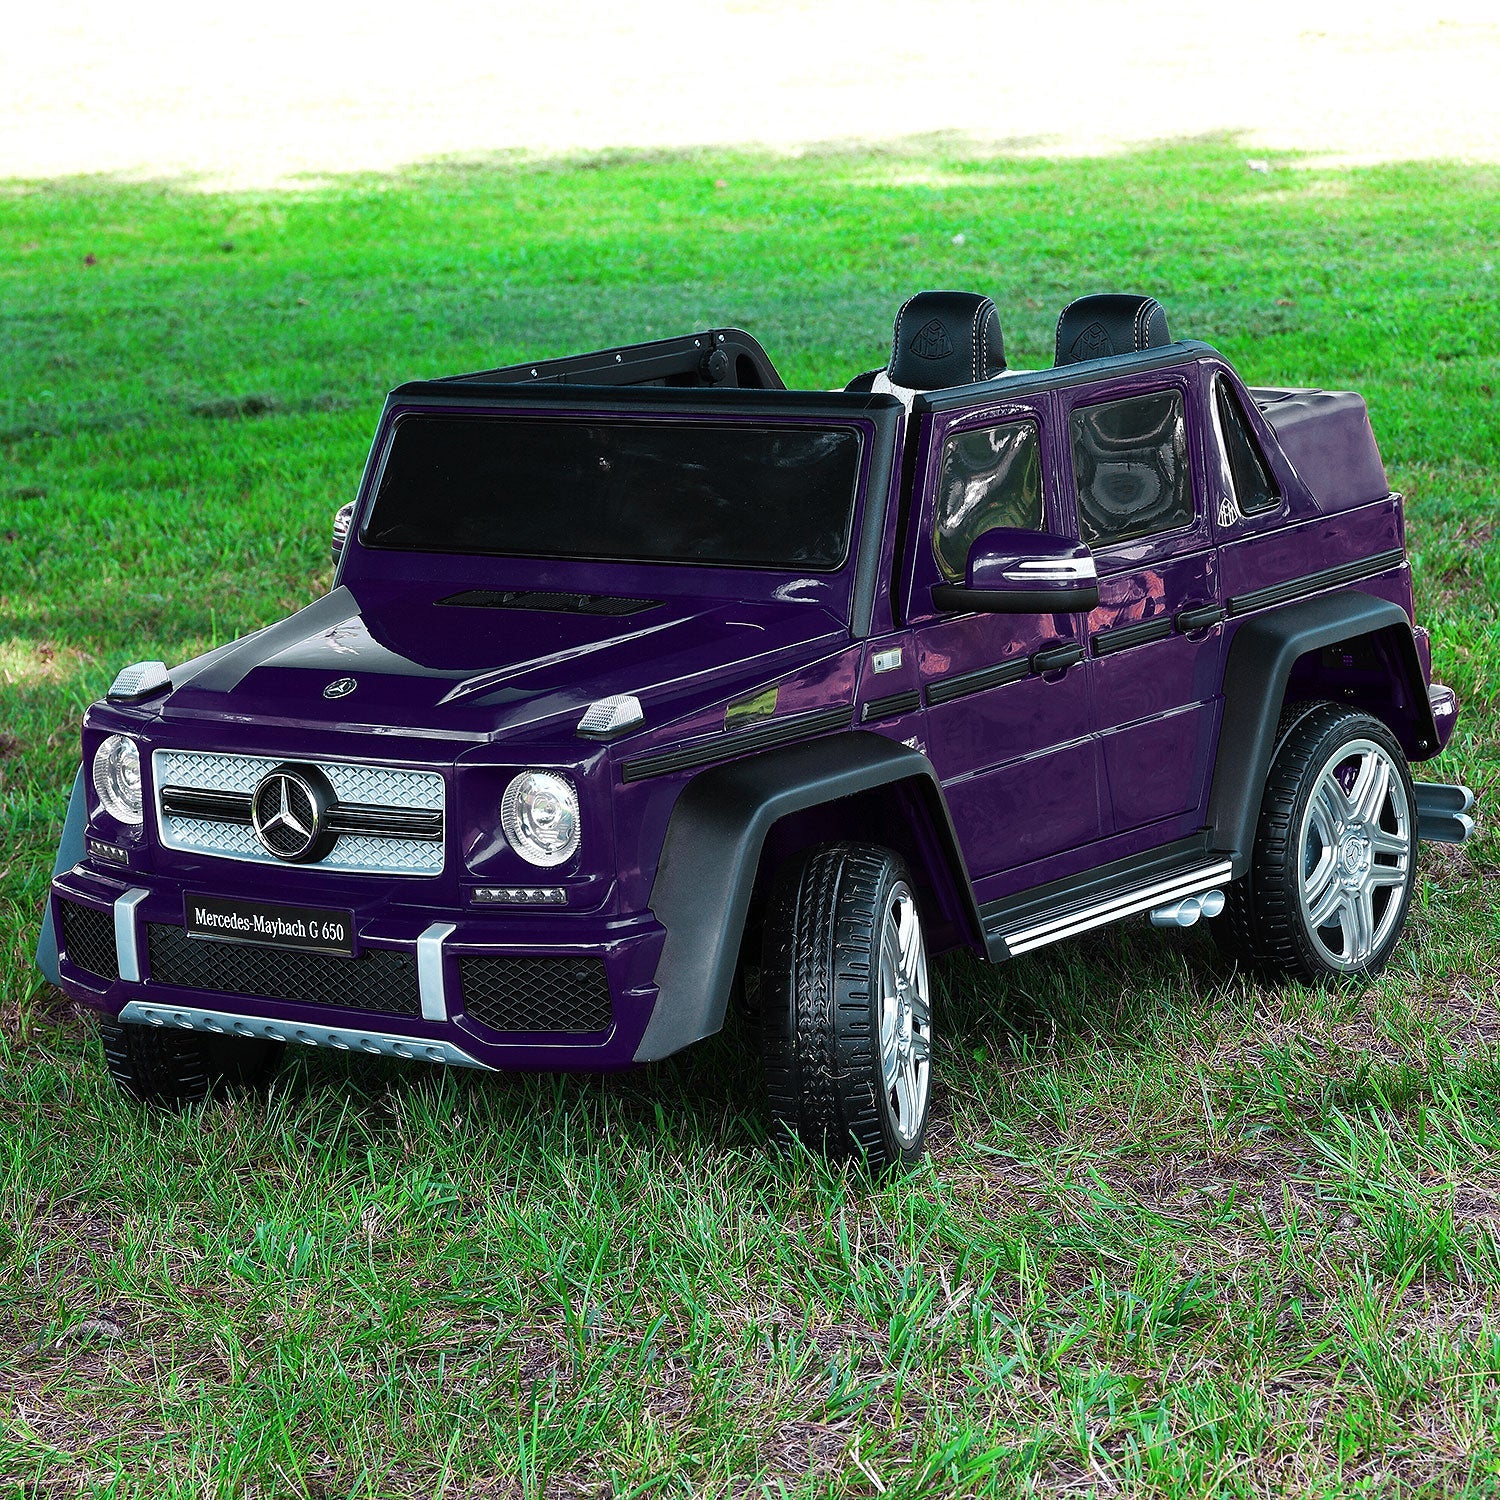 Mercedes Maybach G650 12v Kids Ride-on Car With Parental Remote | Purple